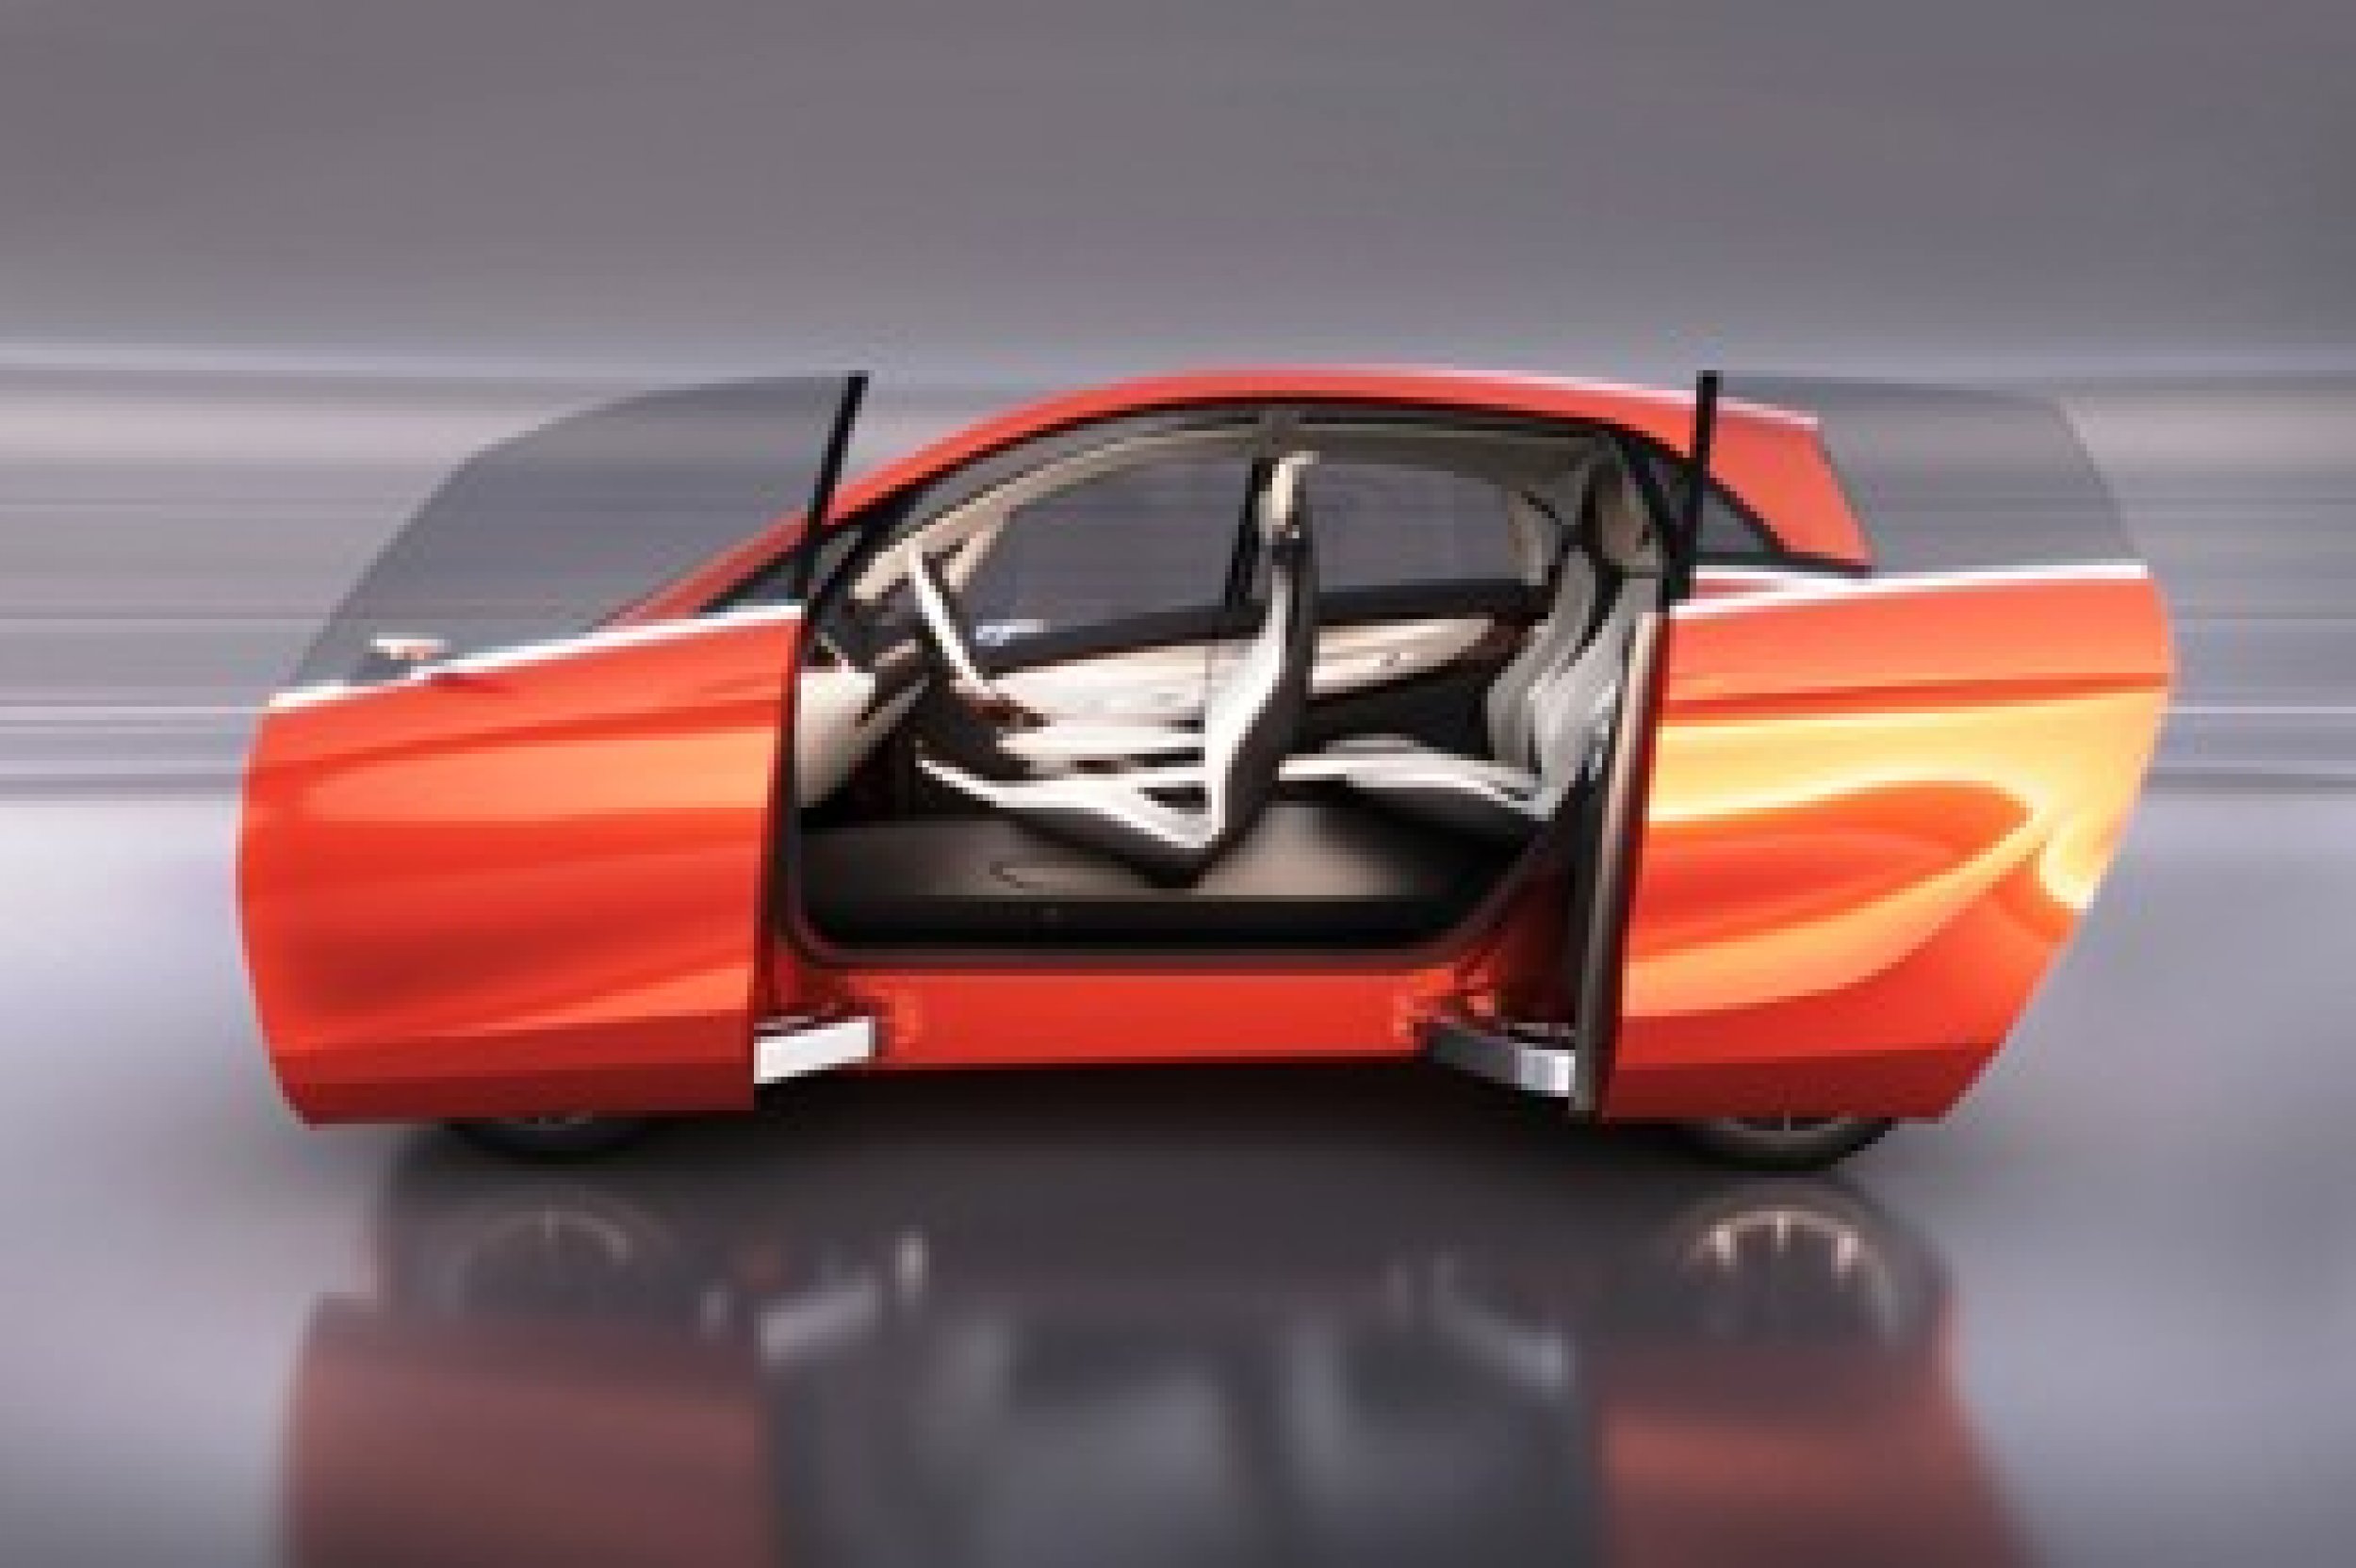 The Tata Megapixel REEV concept was unveiled at the Geneva Motor Show 2012.